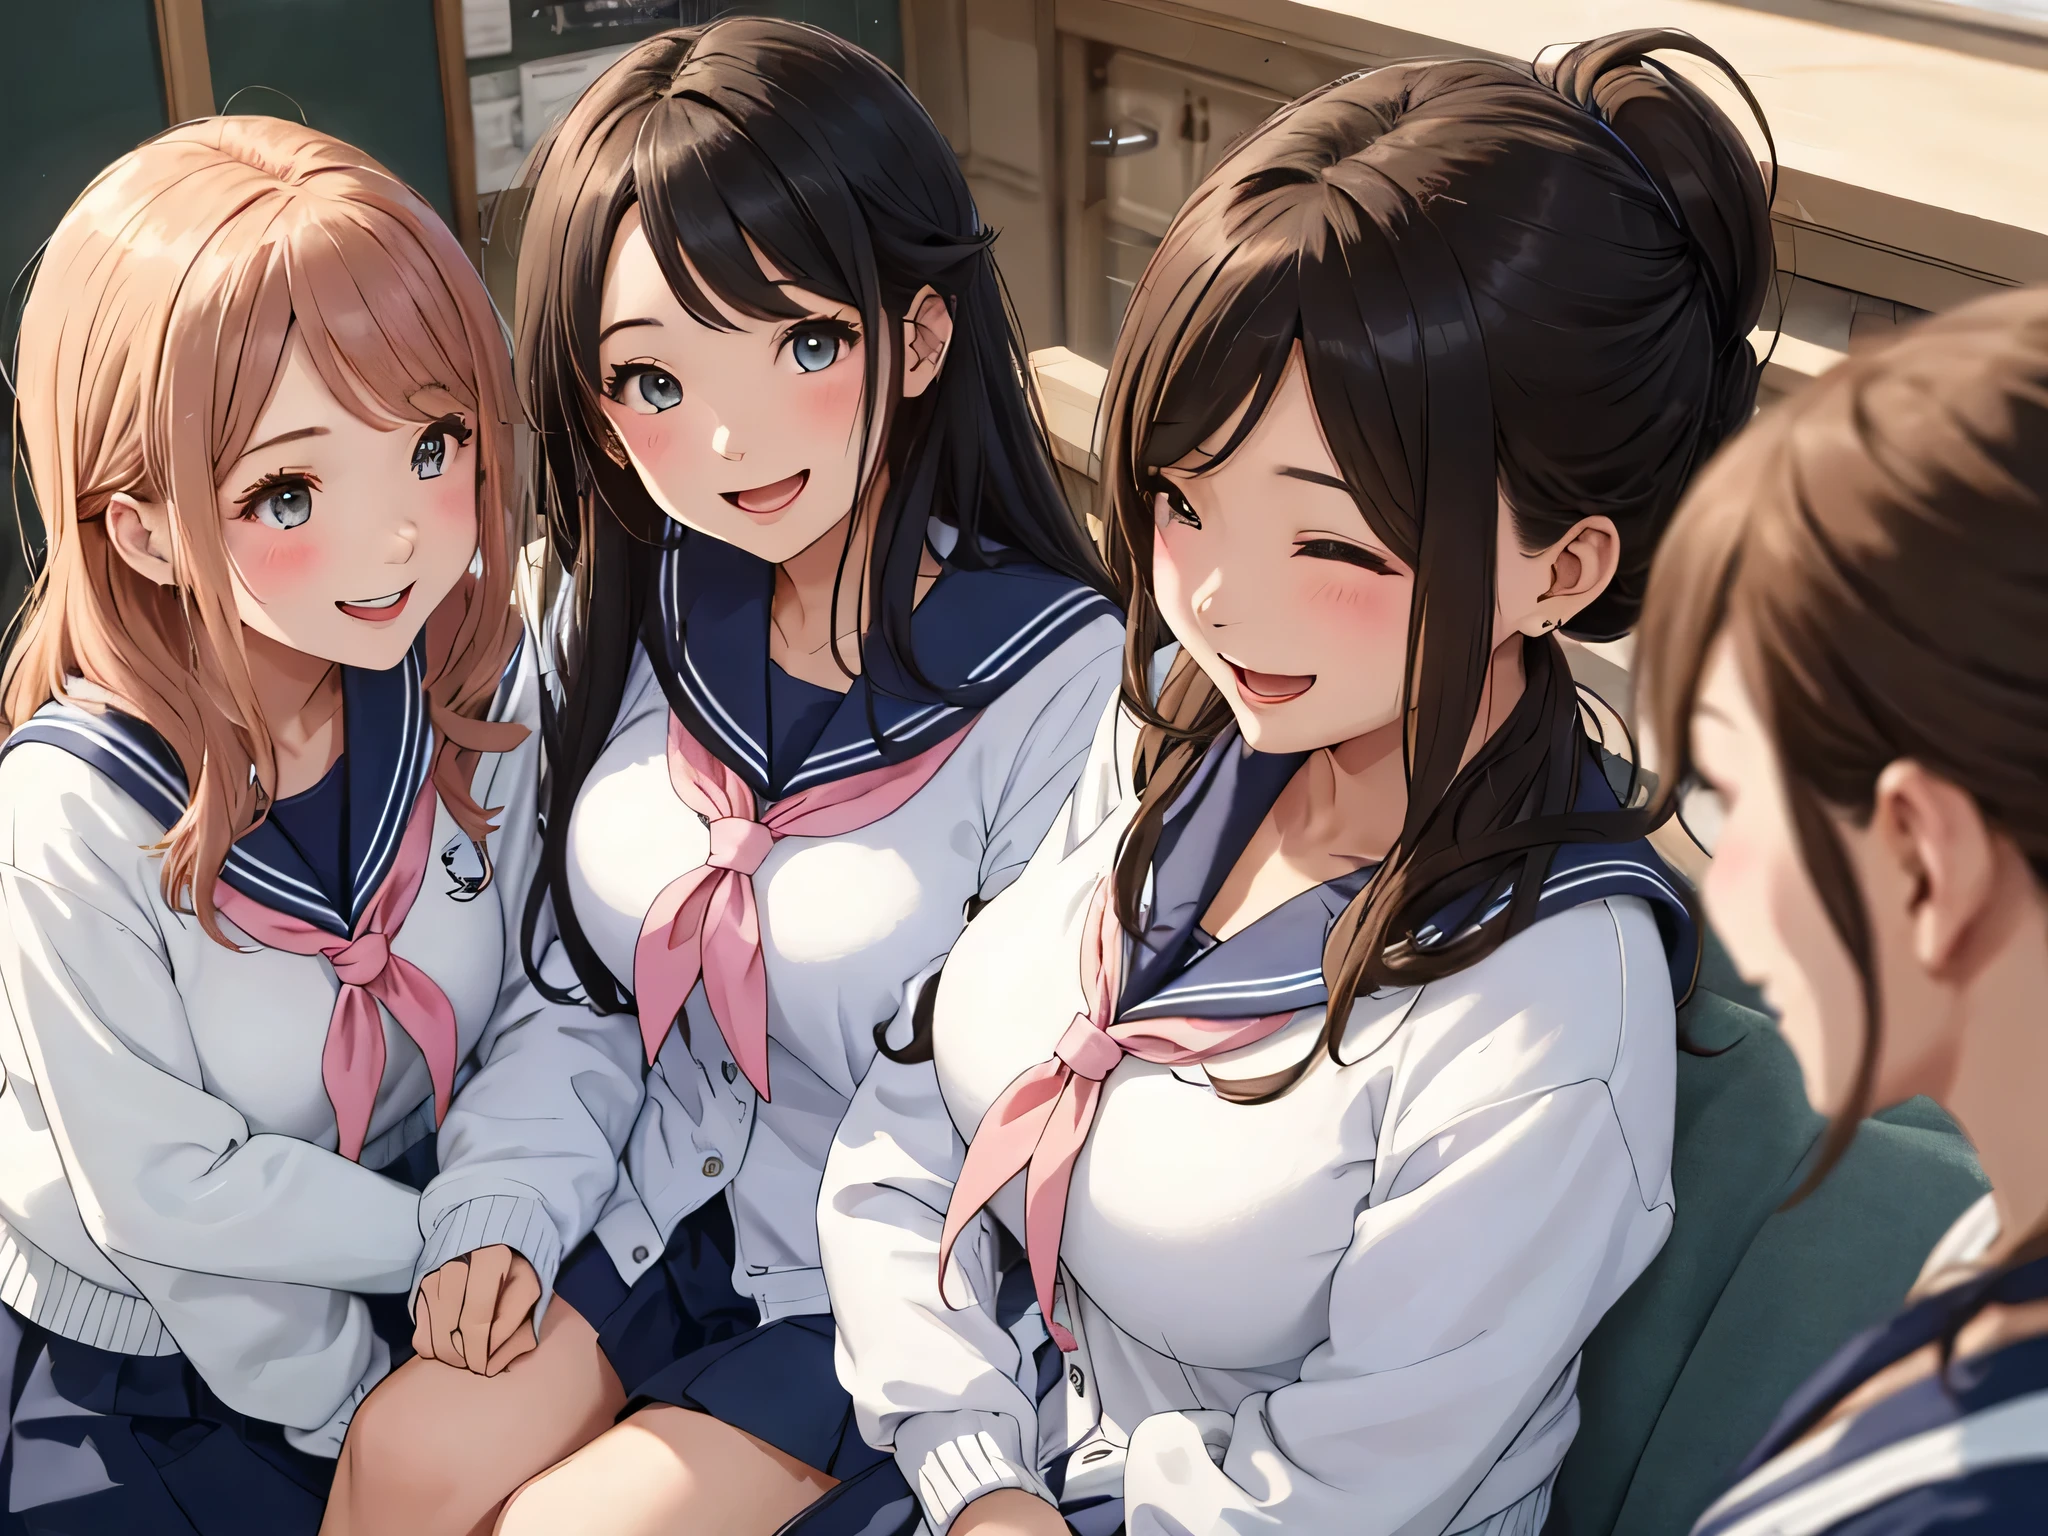 highest quality、High resolution、High resolution、Beautiful teenage girl、Four women,sailor suit,cute hairstyle,perfect skin,huge breasts、Look at me happily、smile、laughter、sexual expression、Upper body、Cute colored school cardigan